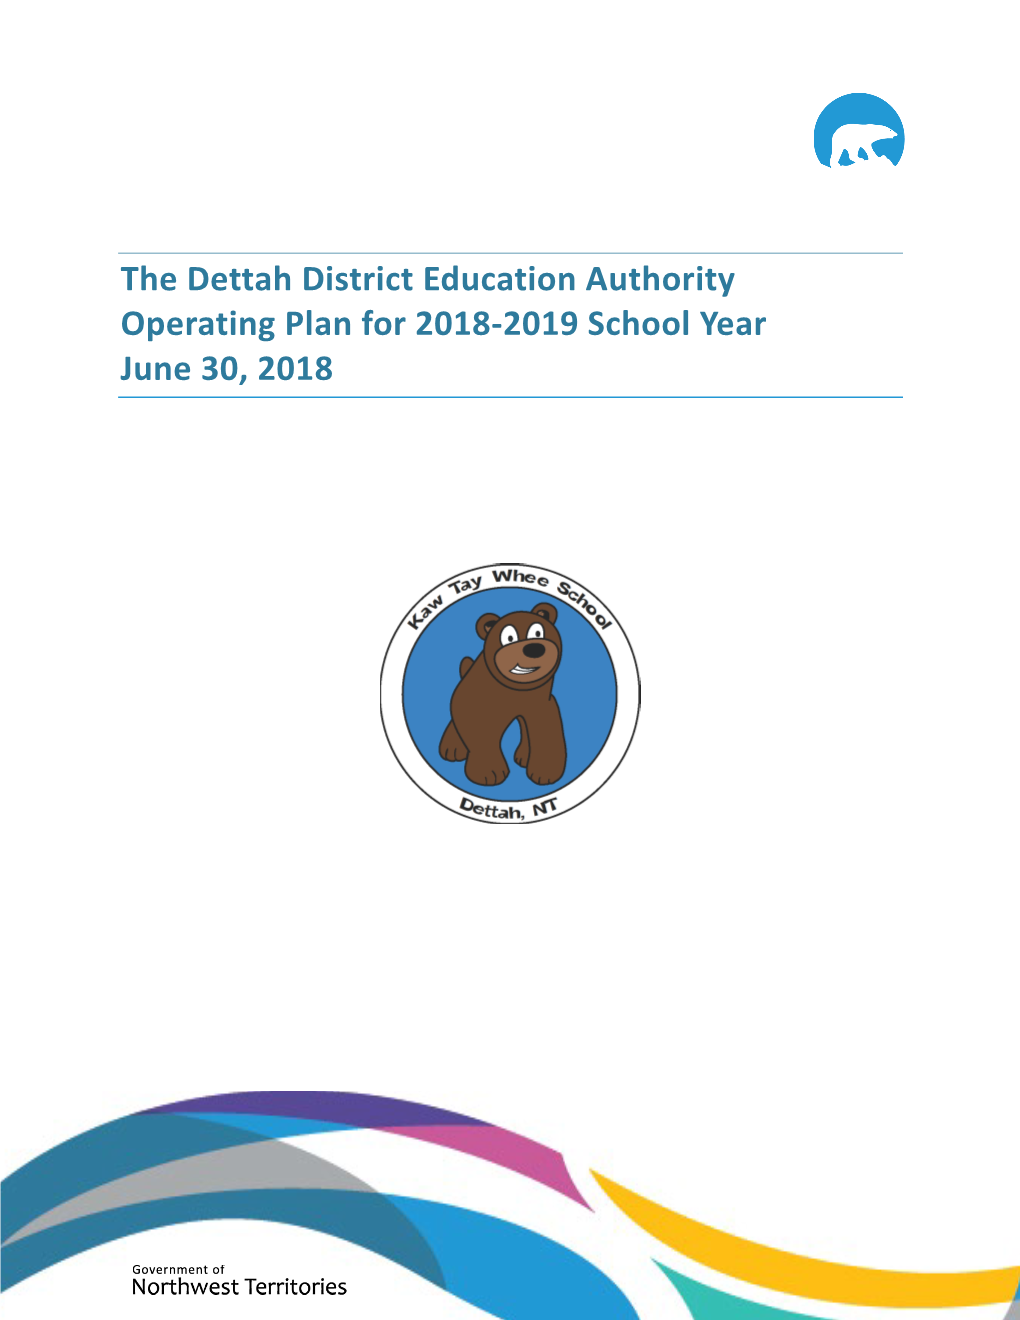 The Dettah District Education Authority Operating Plan for 2018-2019 School Year June 30, 2018